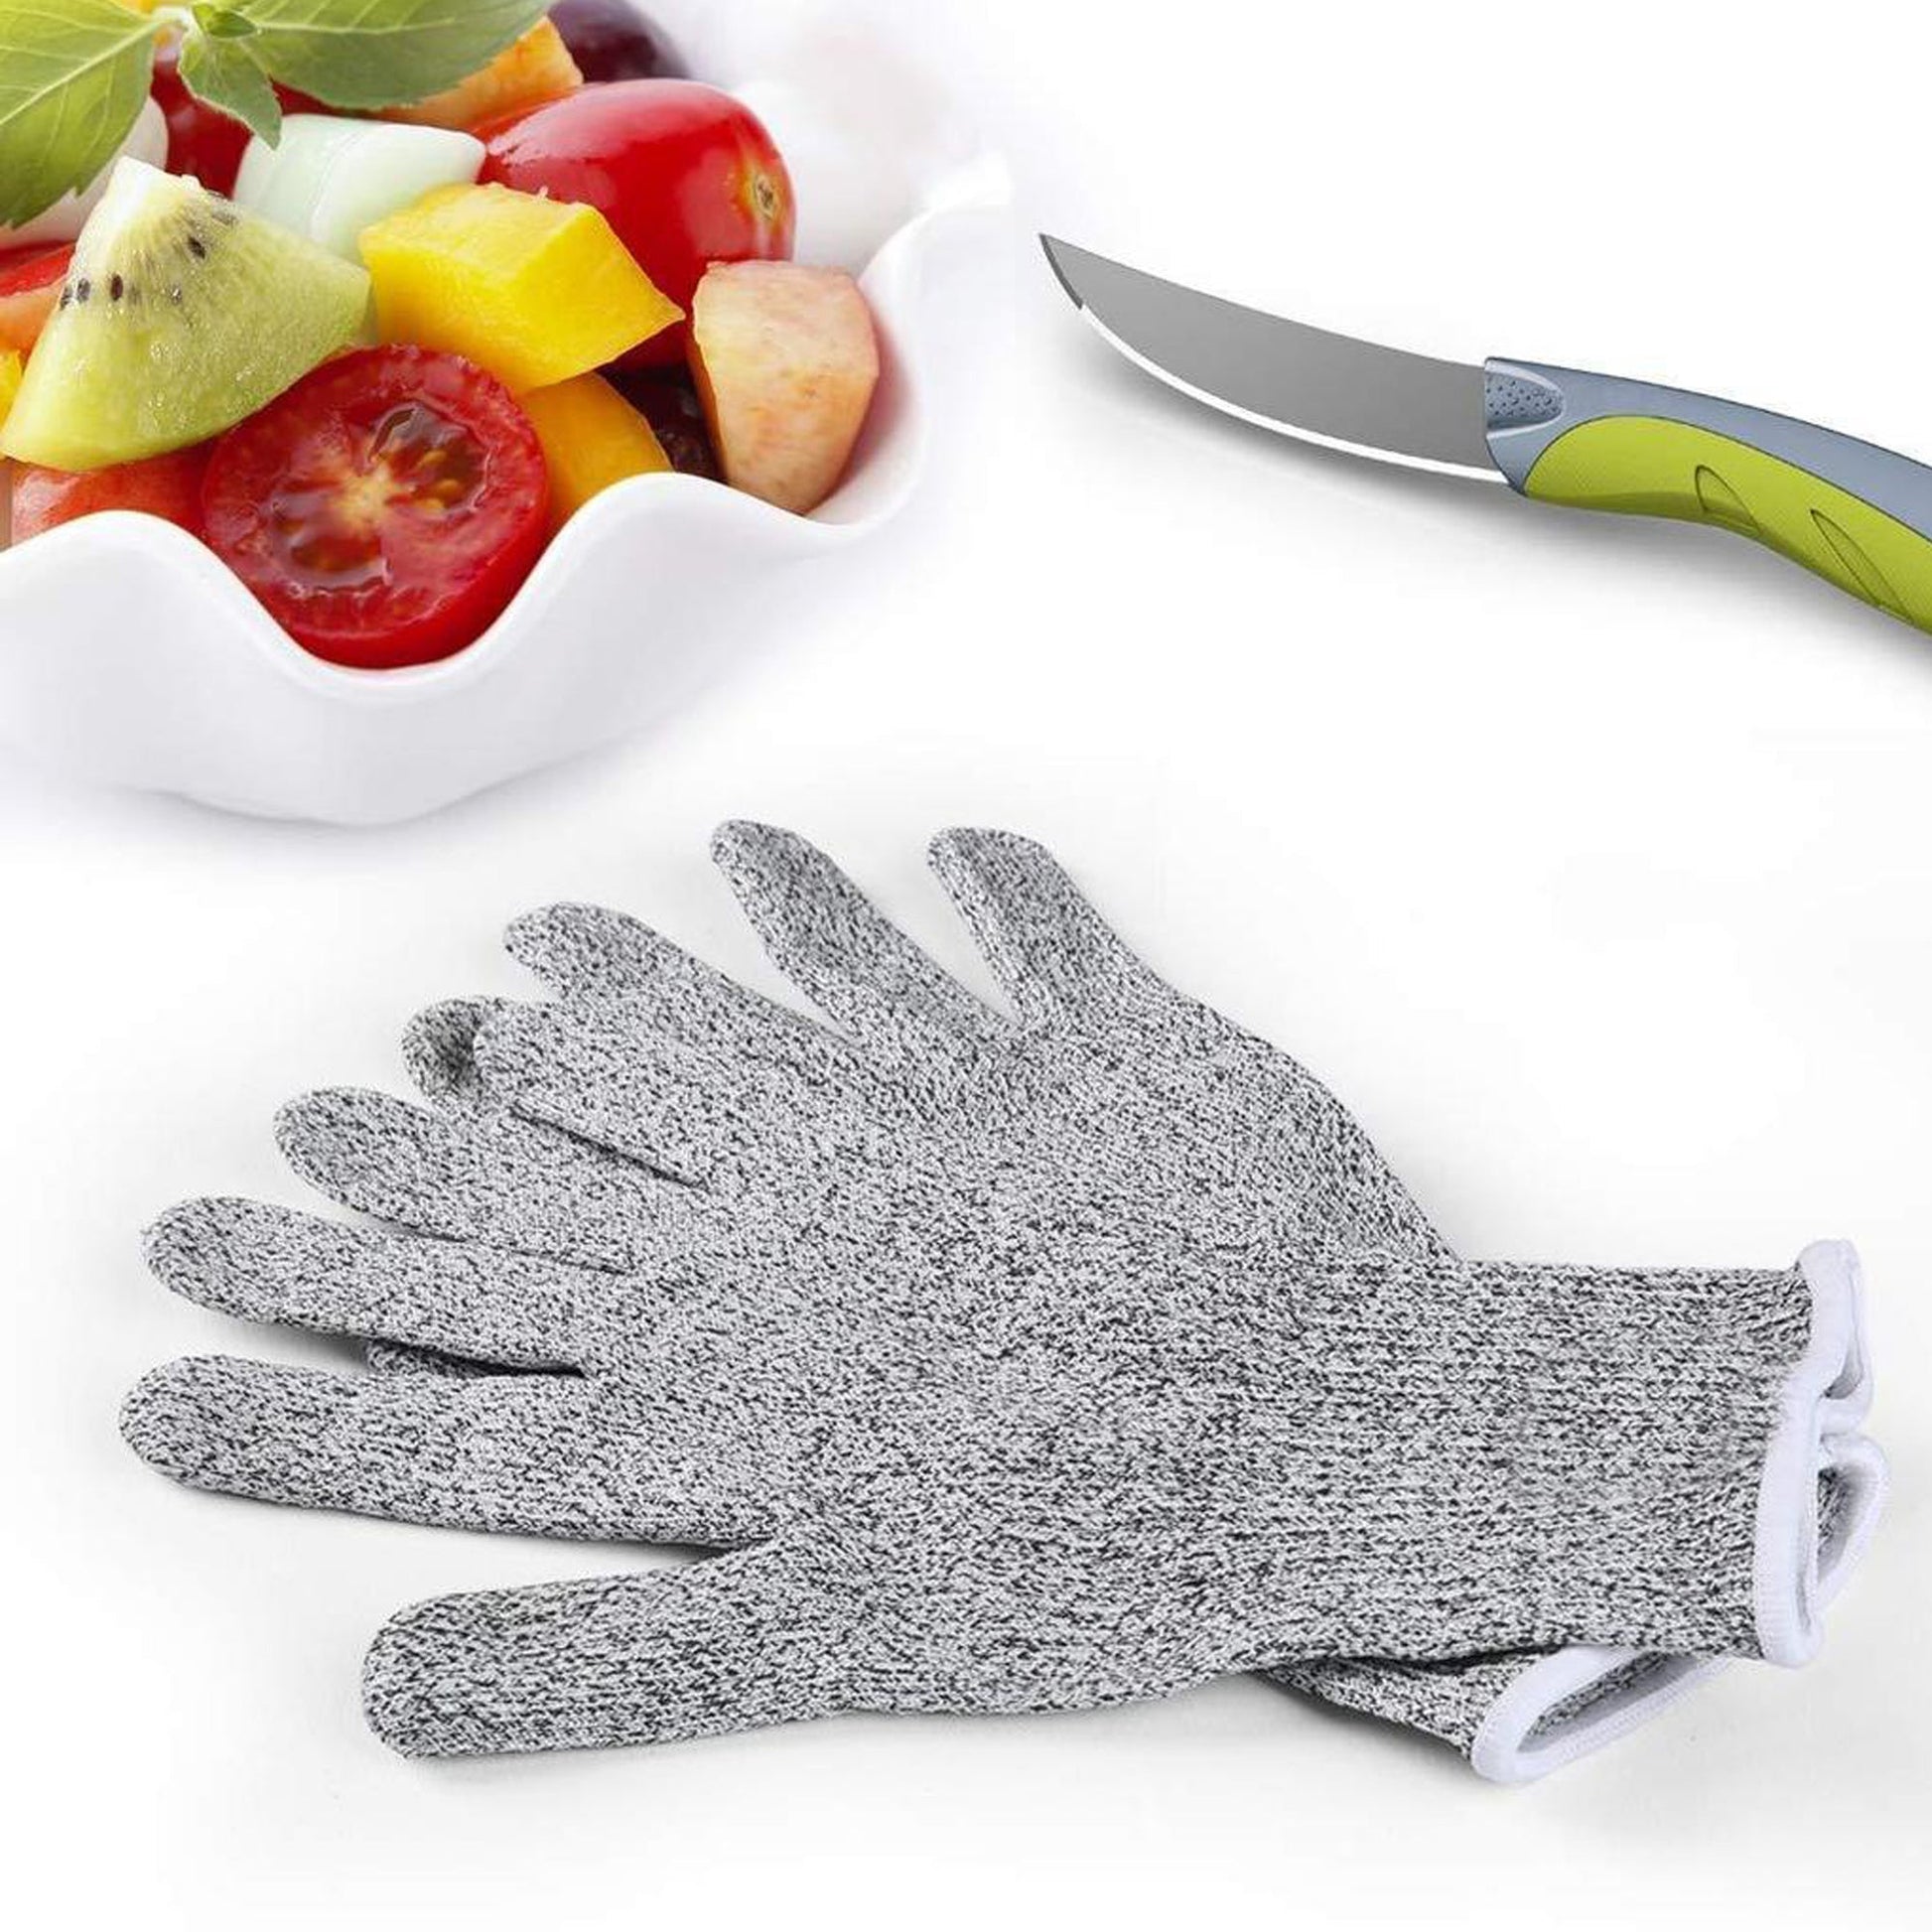 0677 Anti Cutting Resistant Hand Safety Cut-Proof Protection Gloves  (Multicolour) DeoDap